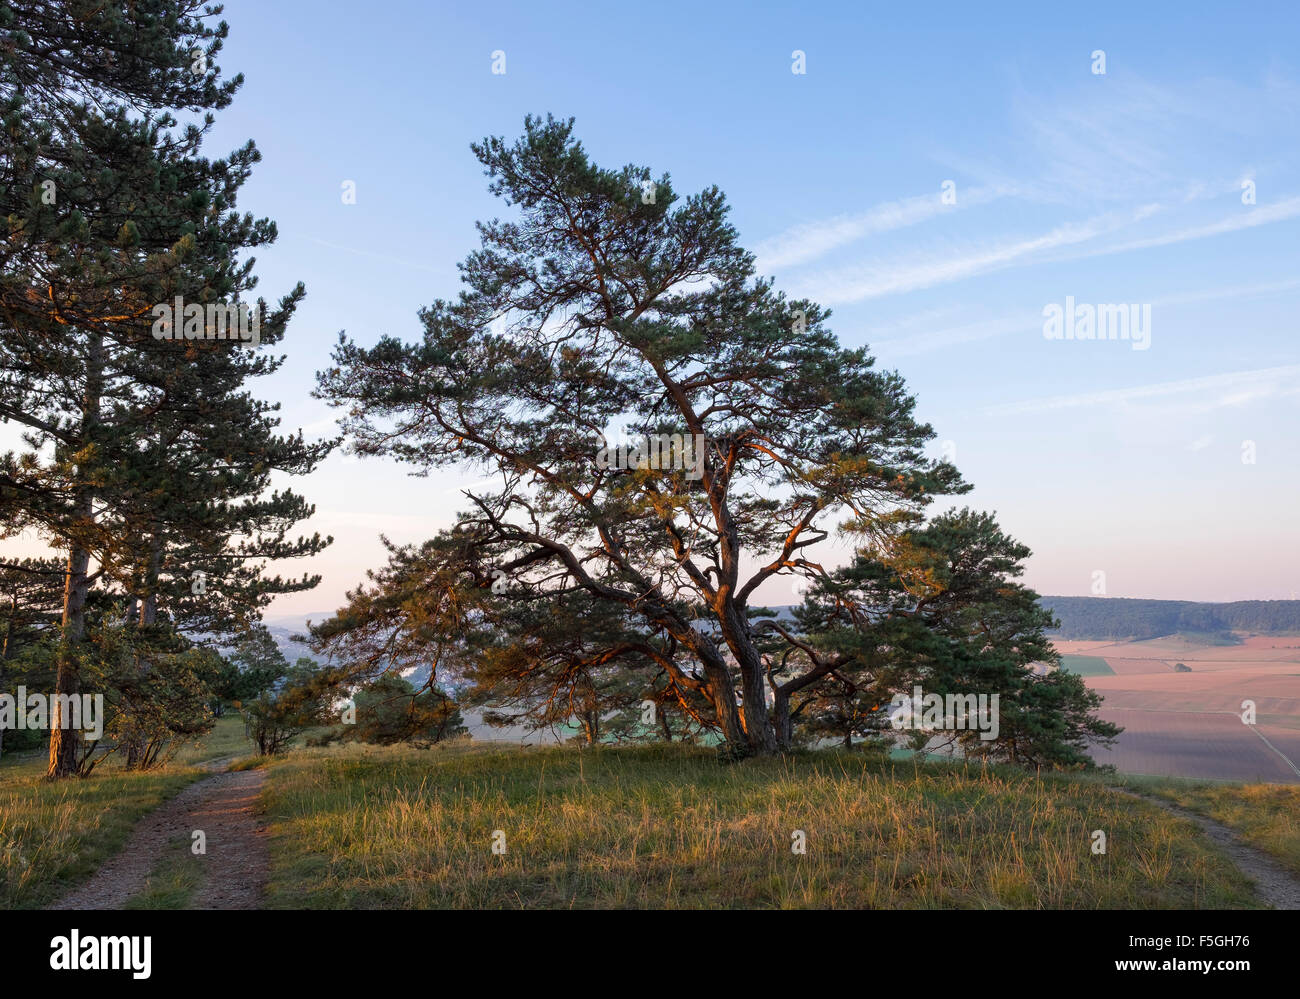 Road and pine trees in the Grainberg-Kalbenstein nature reserve, Lower Franconia, Franconia, Bavaria, Germany Stock Photo